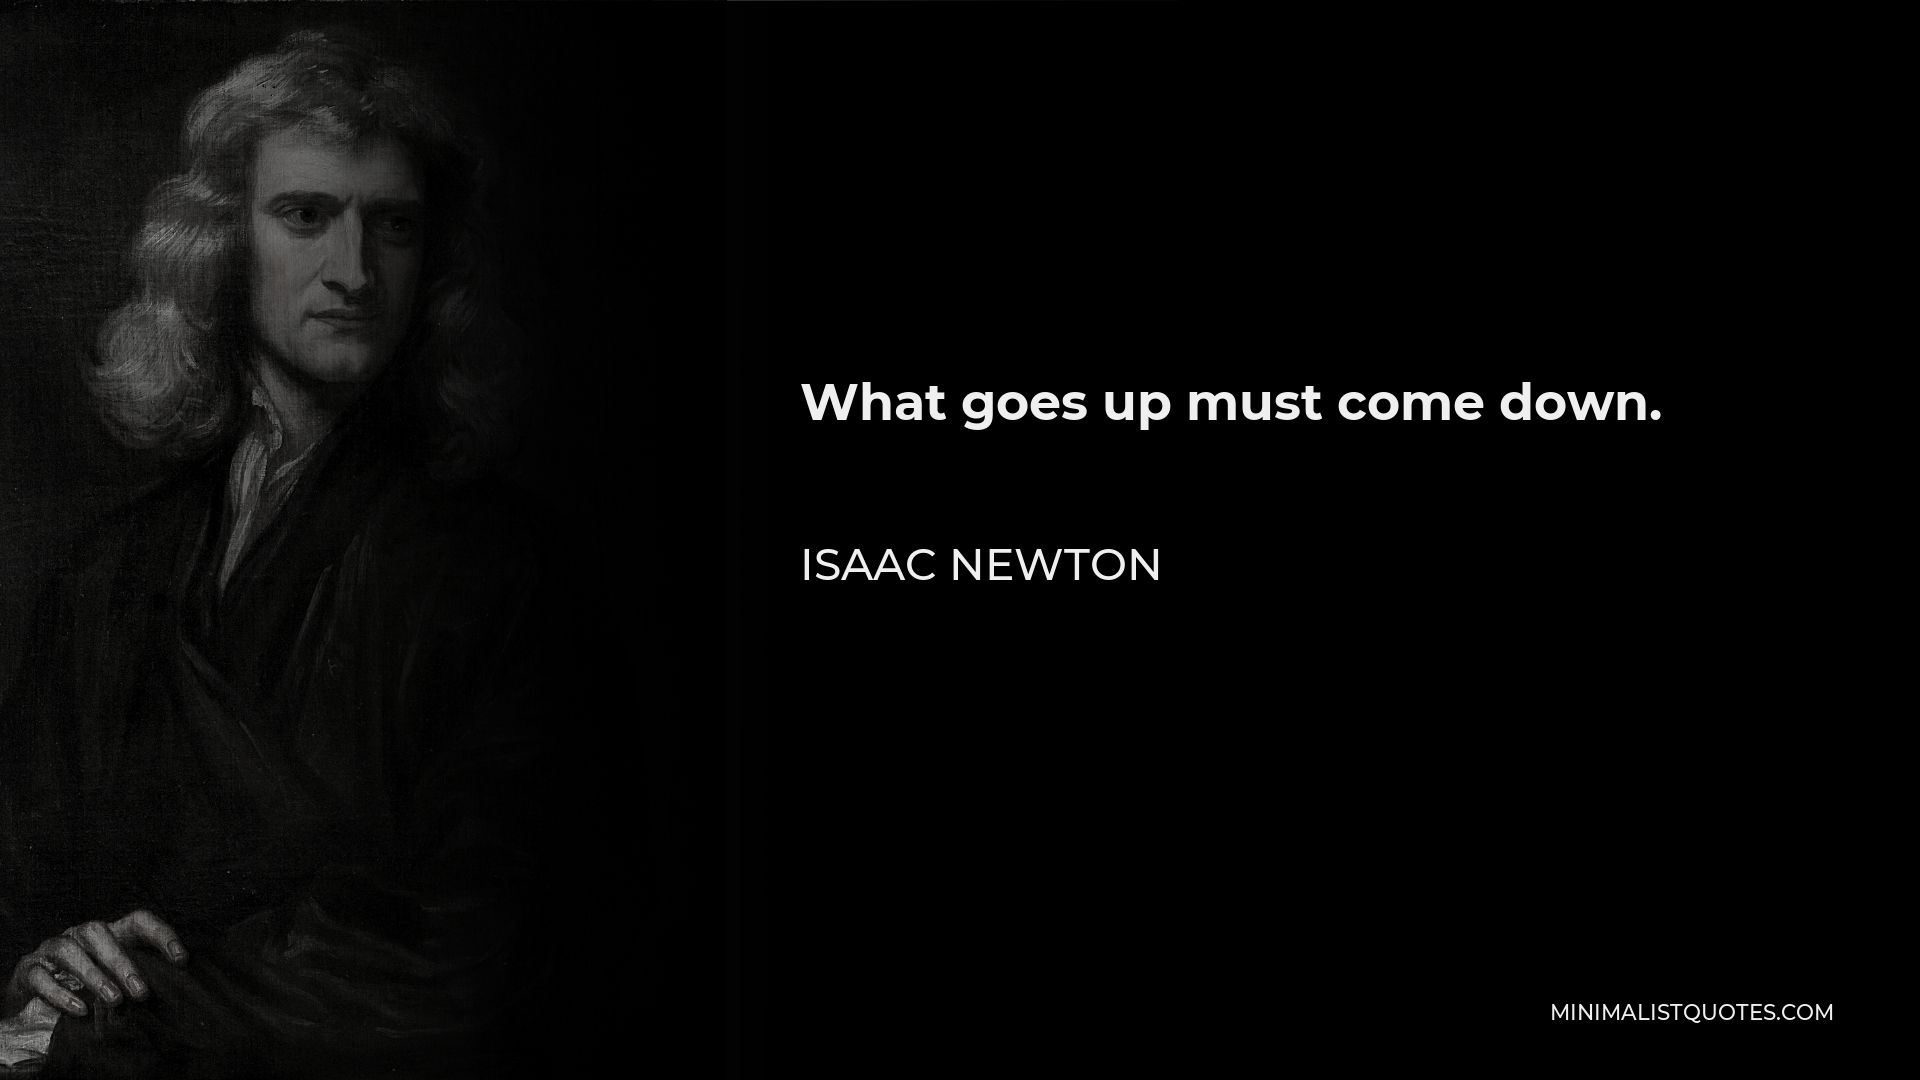 Isaac Newton Quote - What goes up must come down.